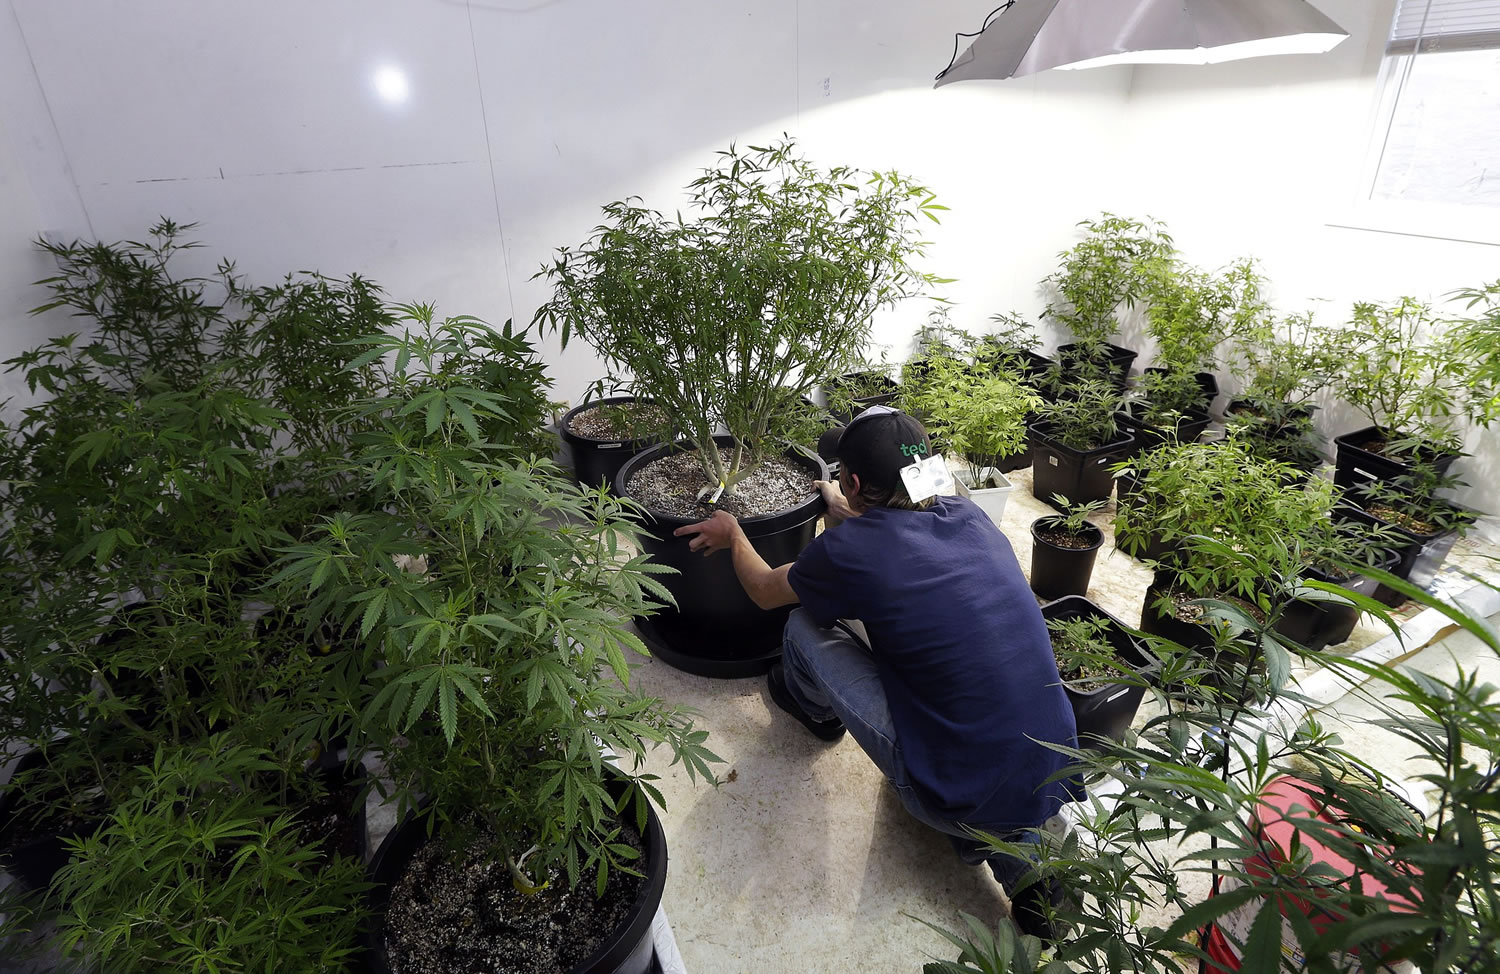 File photos/Associated Press
Johnnie Seitz moves a mother marijuana plant that was used to produce small clone plants at Sea of Green Farms, a recreational pot grower in Seattle.